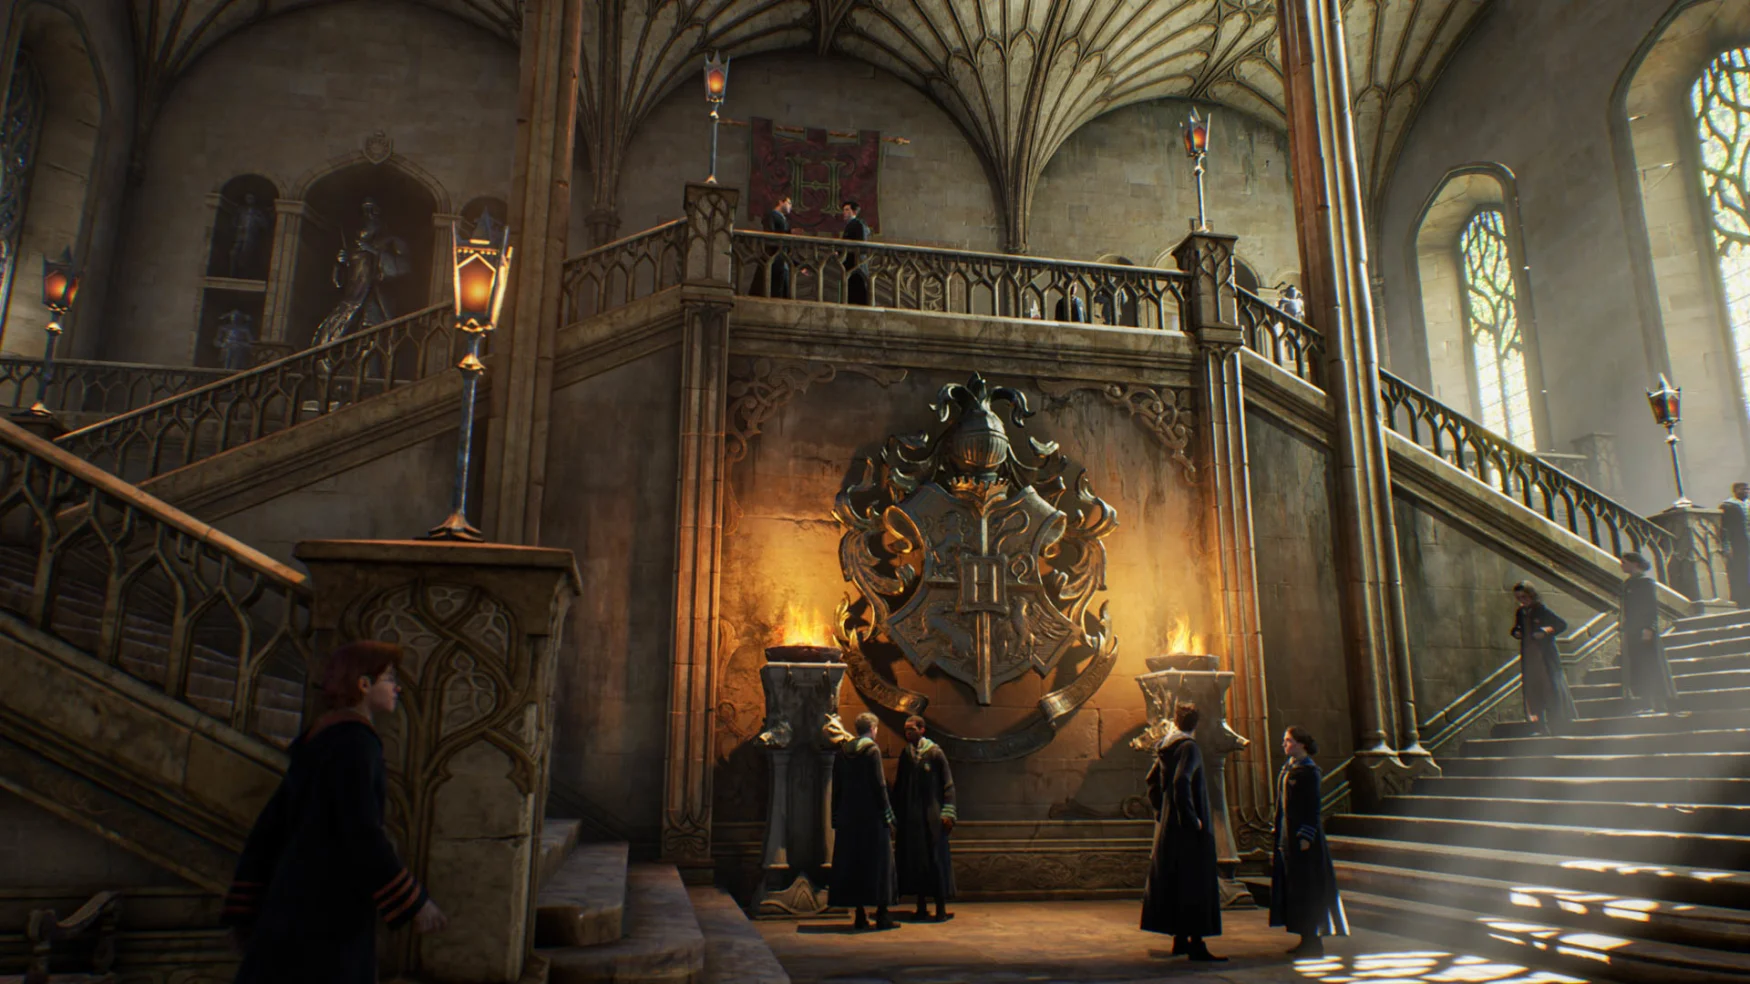 The main hall of Hogwarts fills the space, with students descending a double staircase, the top of which is large and lit by two bonfires on a pedestal.